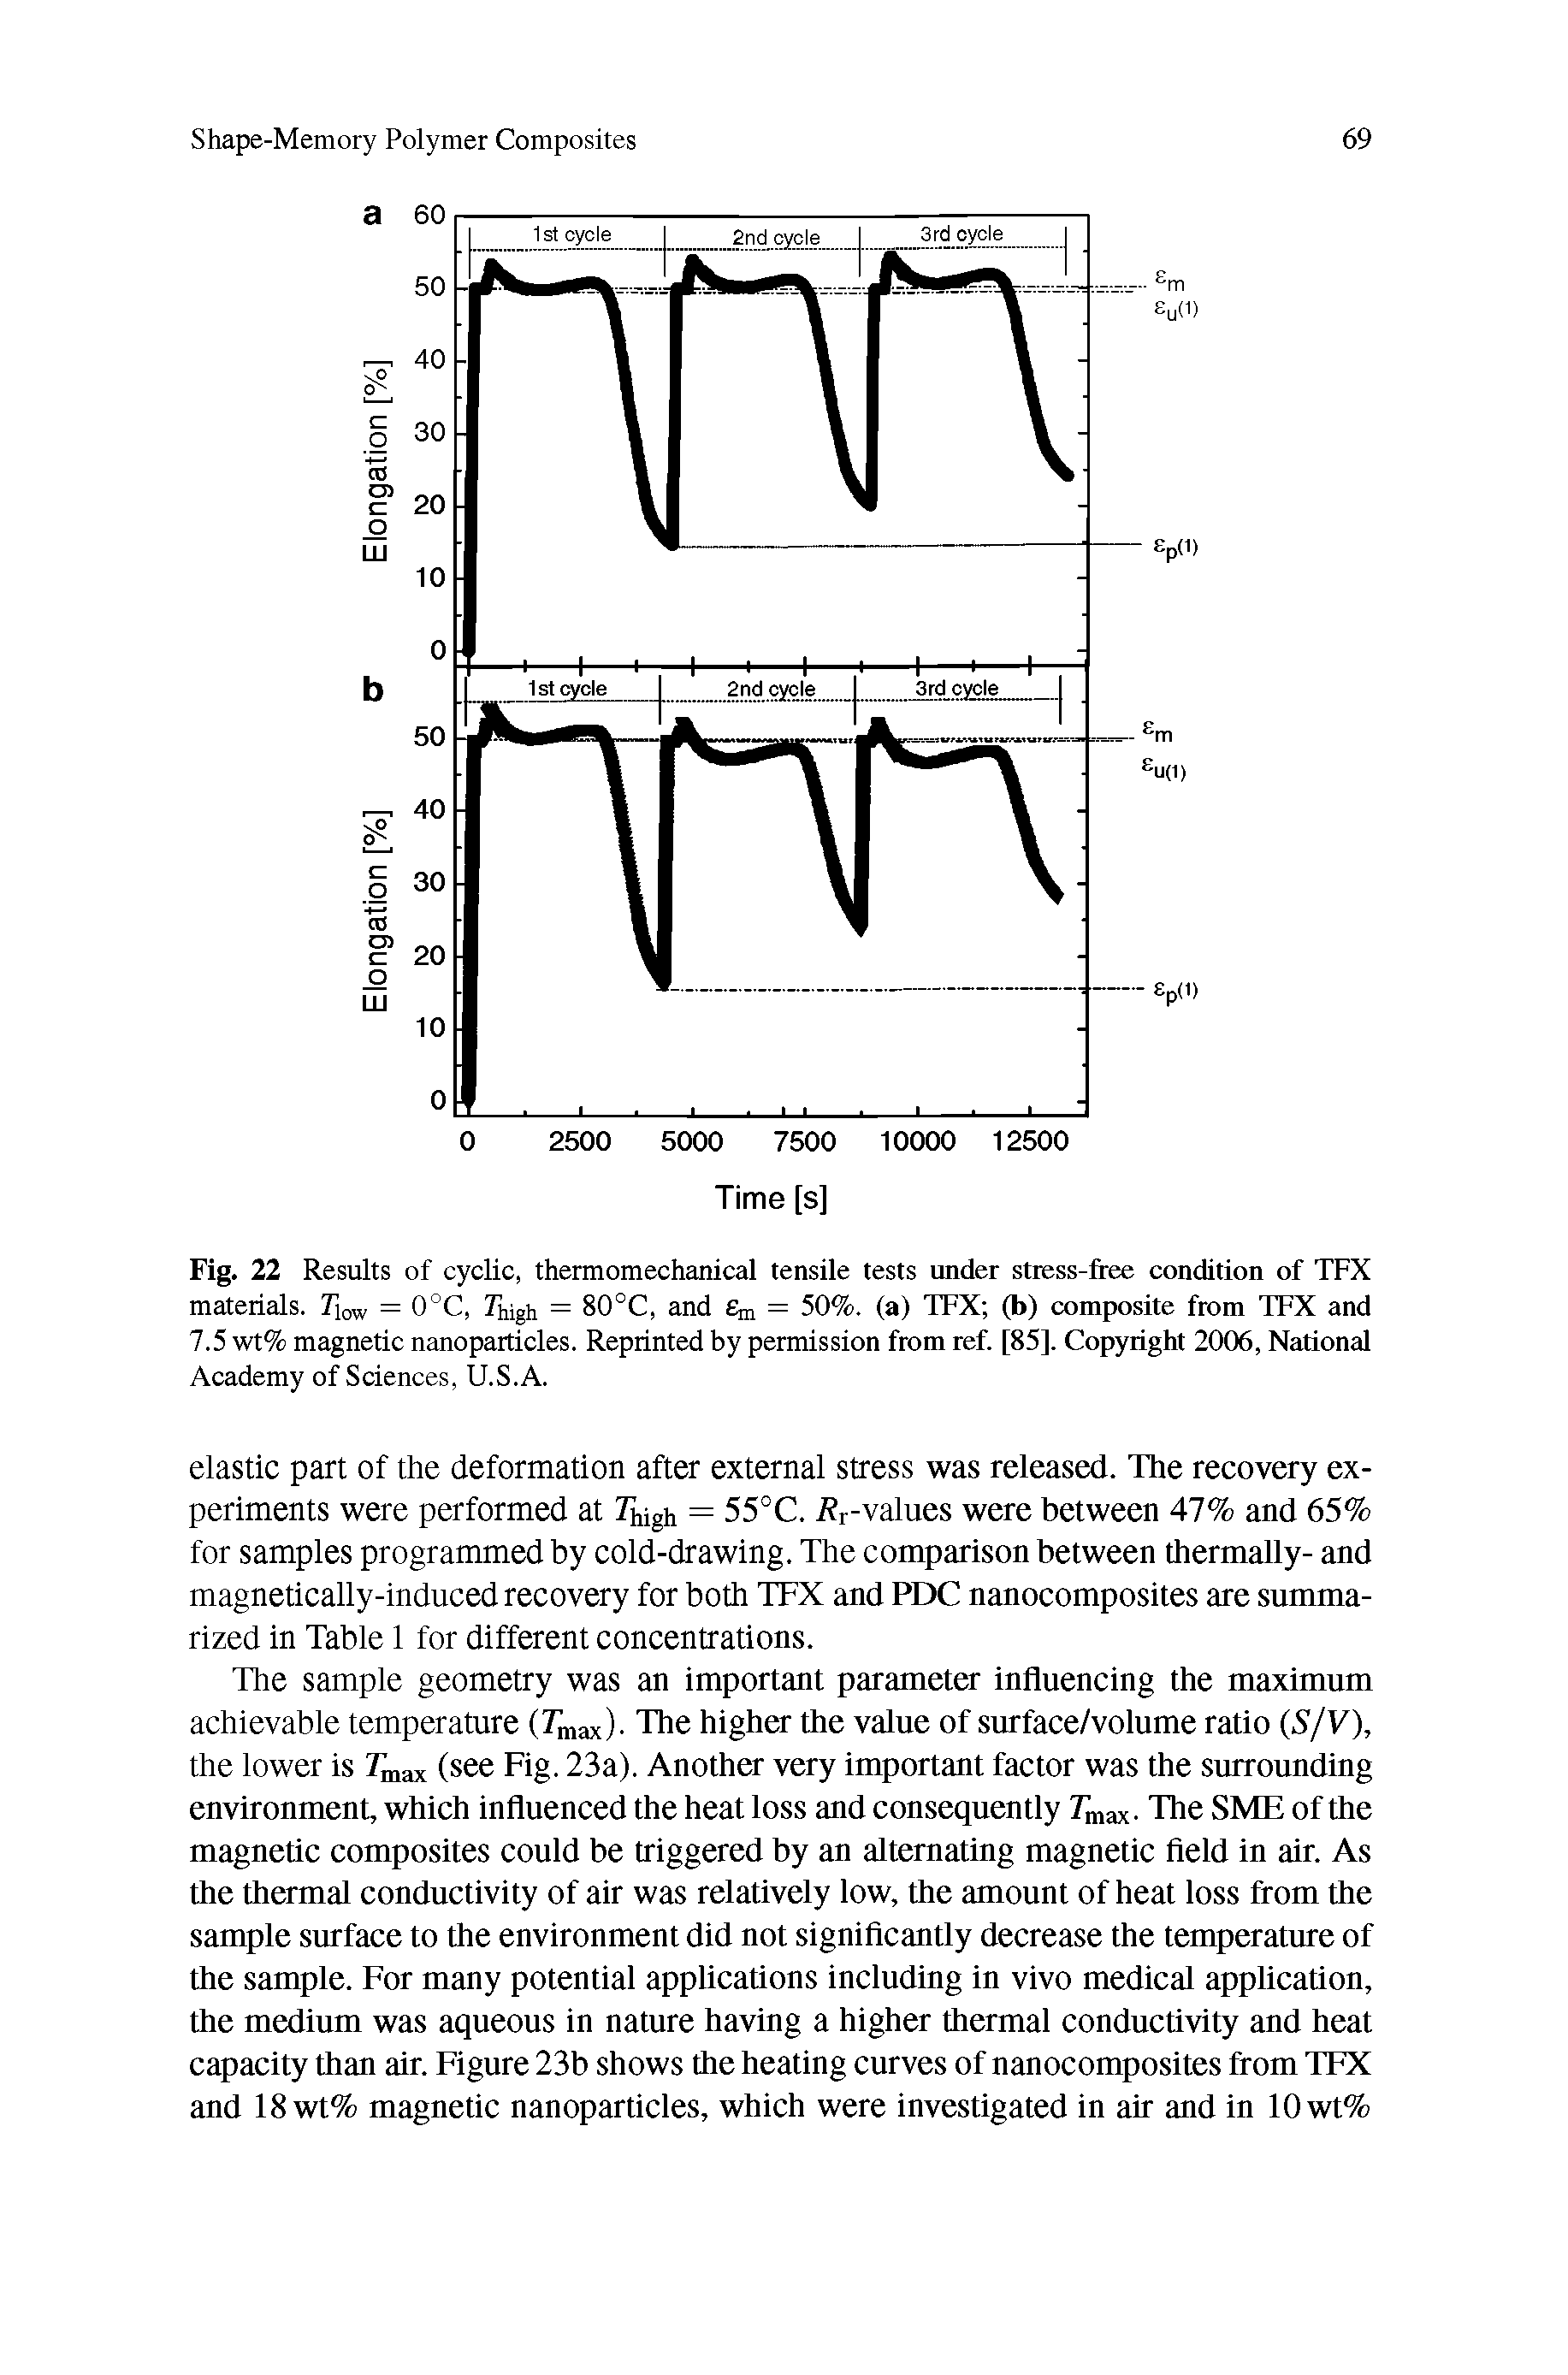 Fig. 22 Results of cyclic, thermomechanical tensile tests under stress-free condition of TFX materials. Tiow = 0°C, Thigh = 80°C, and m = 50%. (a) TFX (b) composite from TFX and 7.5 wt% magnetic nanoparticles. Reprinted by permission from ref. [85]. Copyright 2006, National Academy of Sciences, U.S.A.